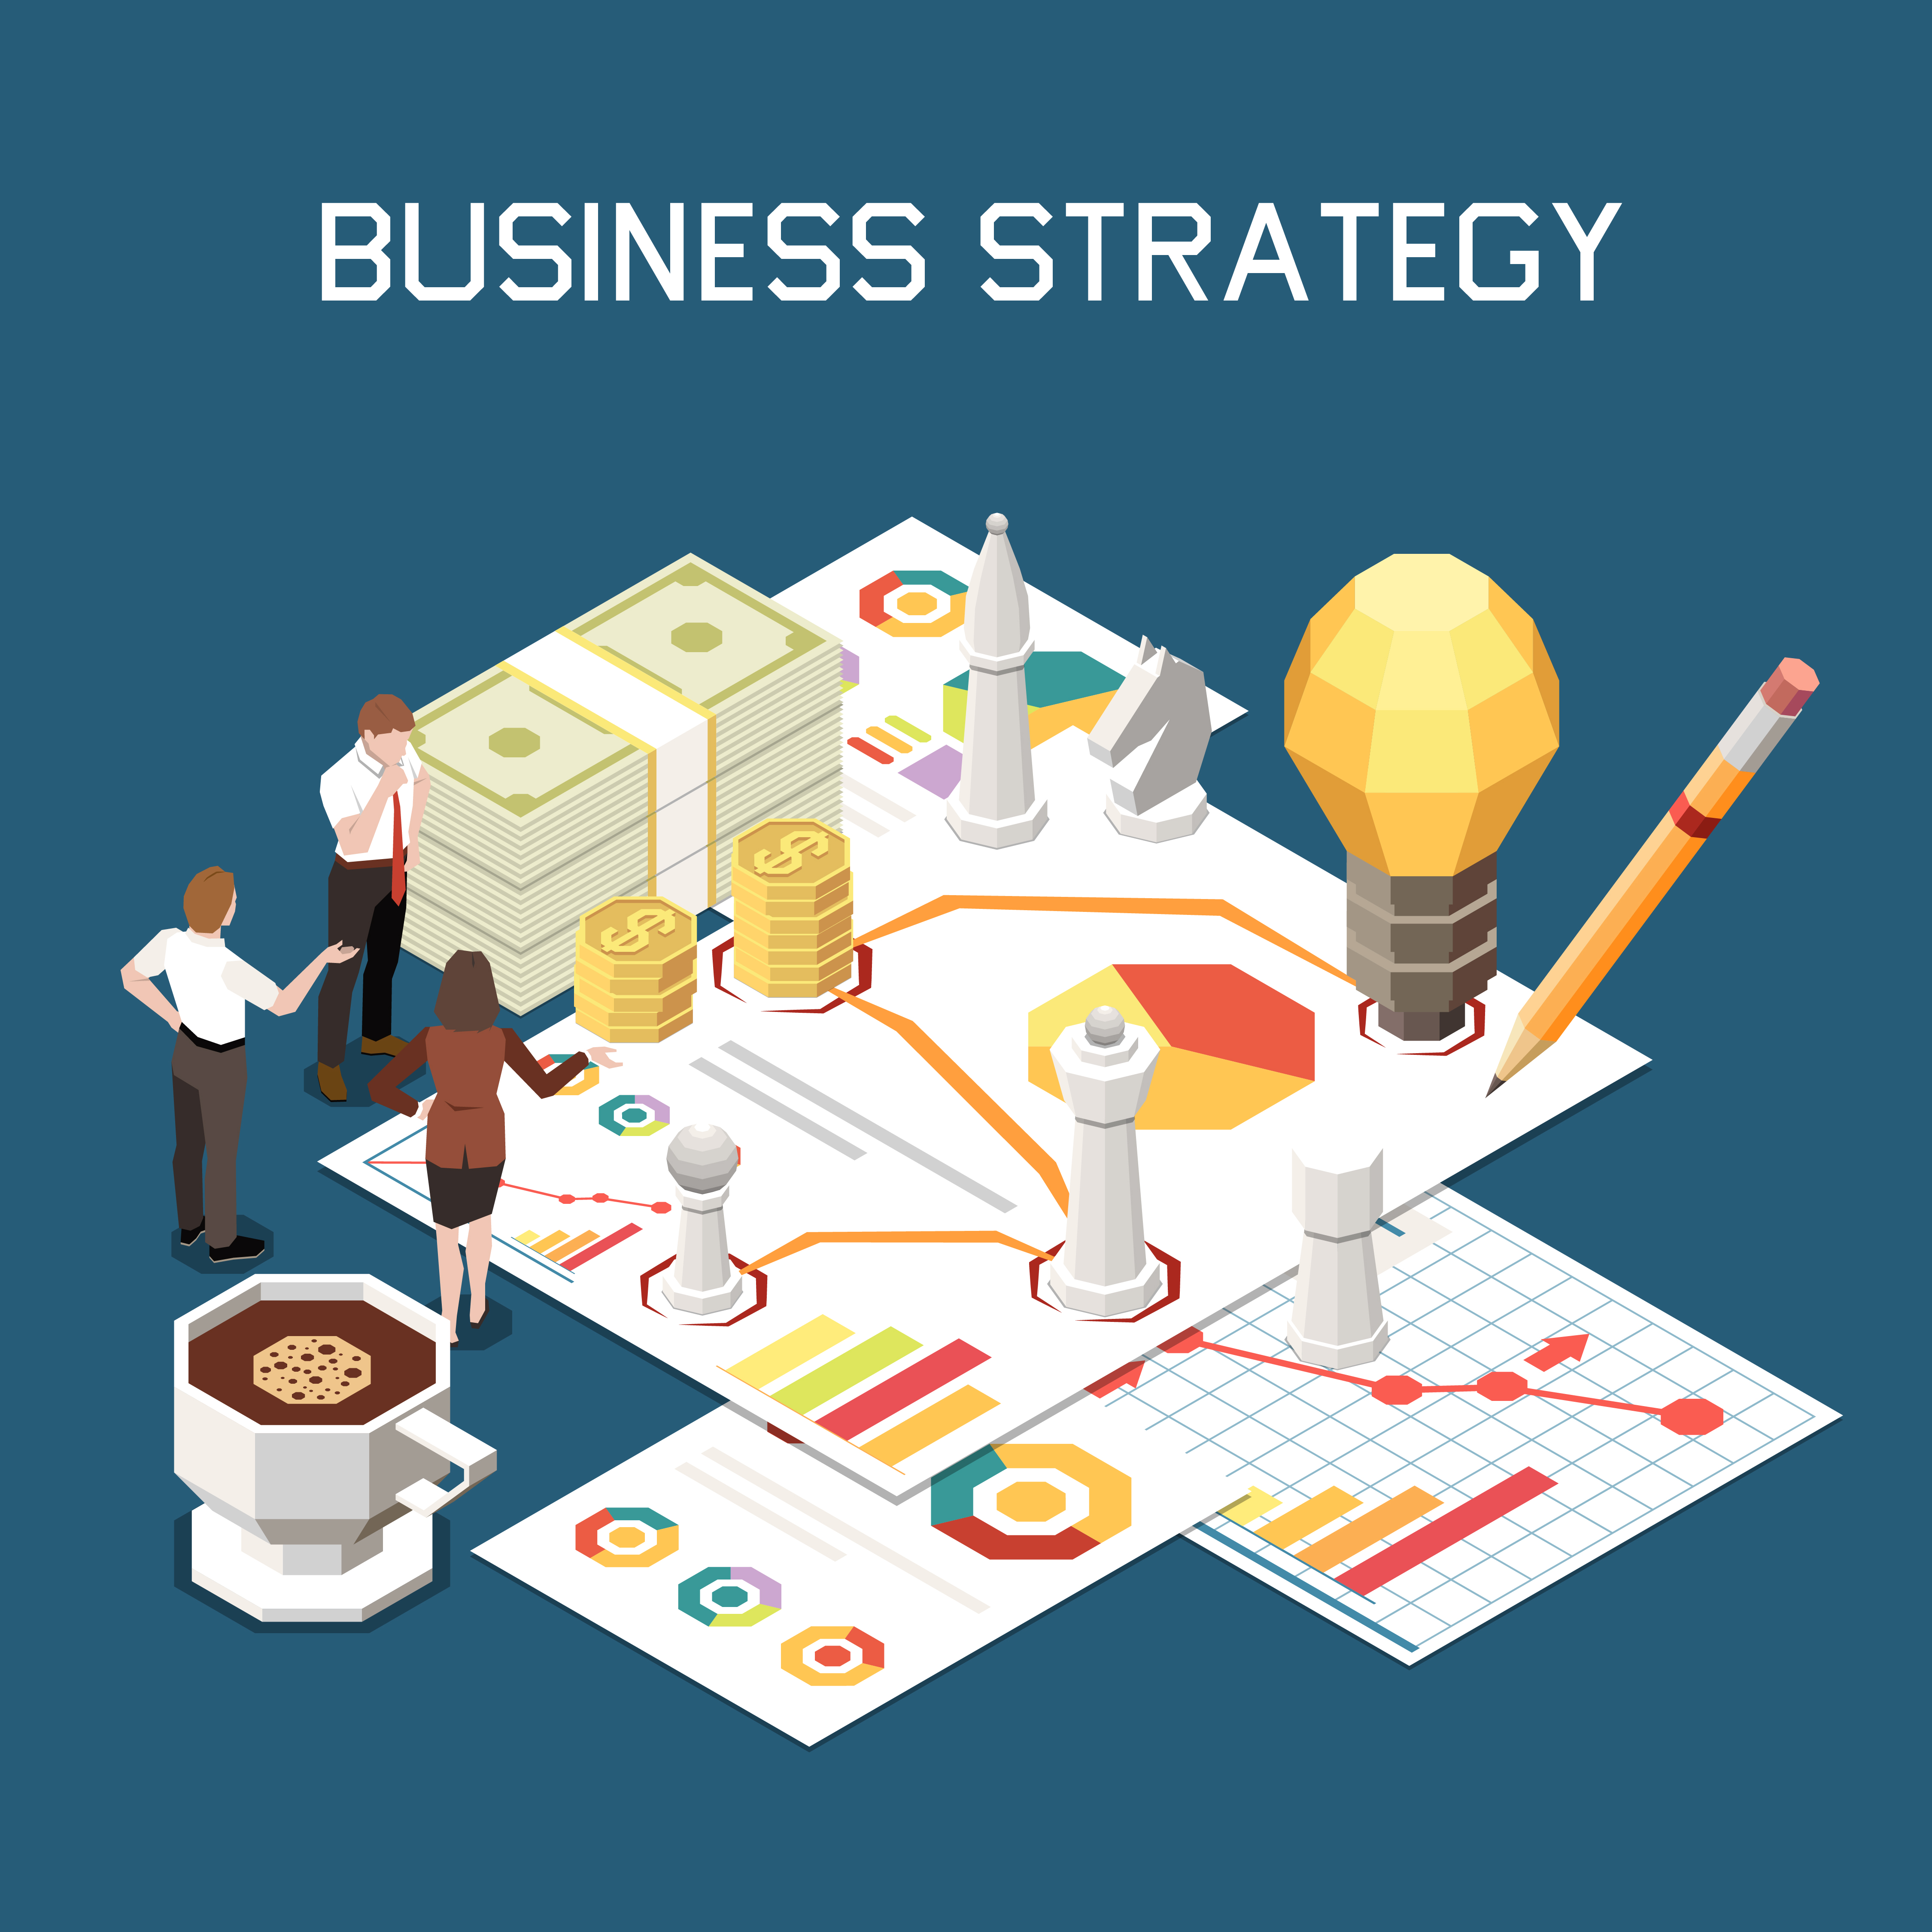 BUSINESS STRATEGY